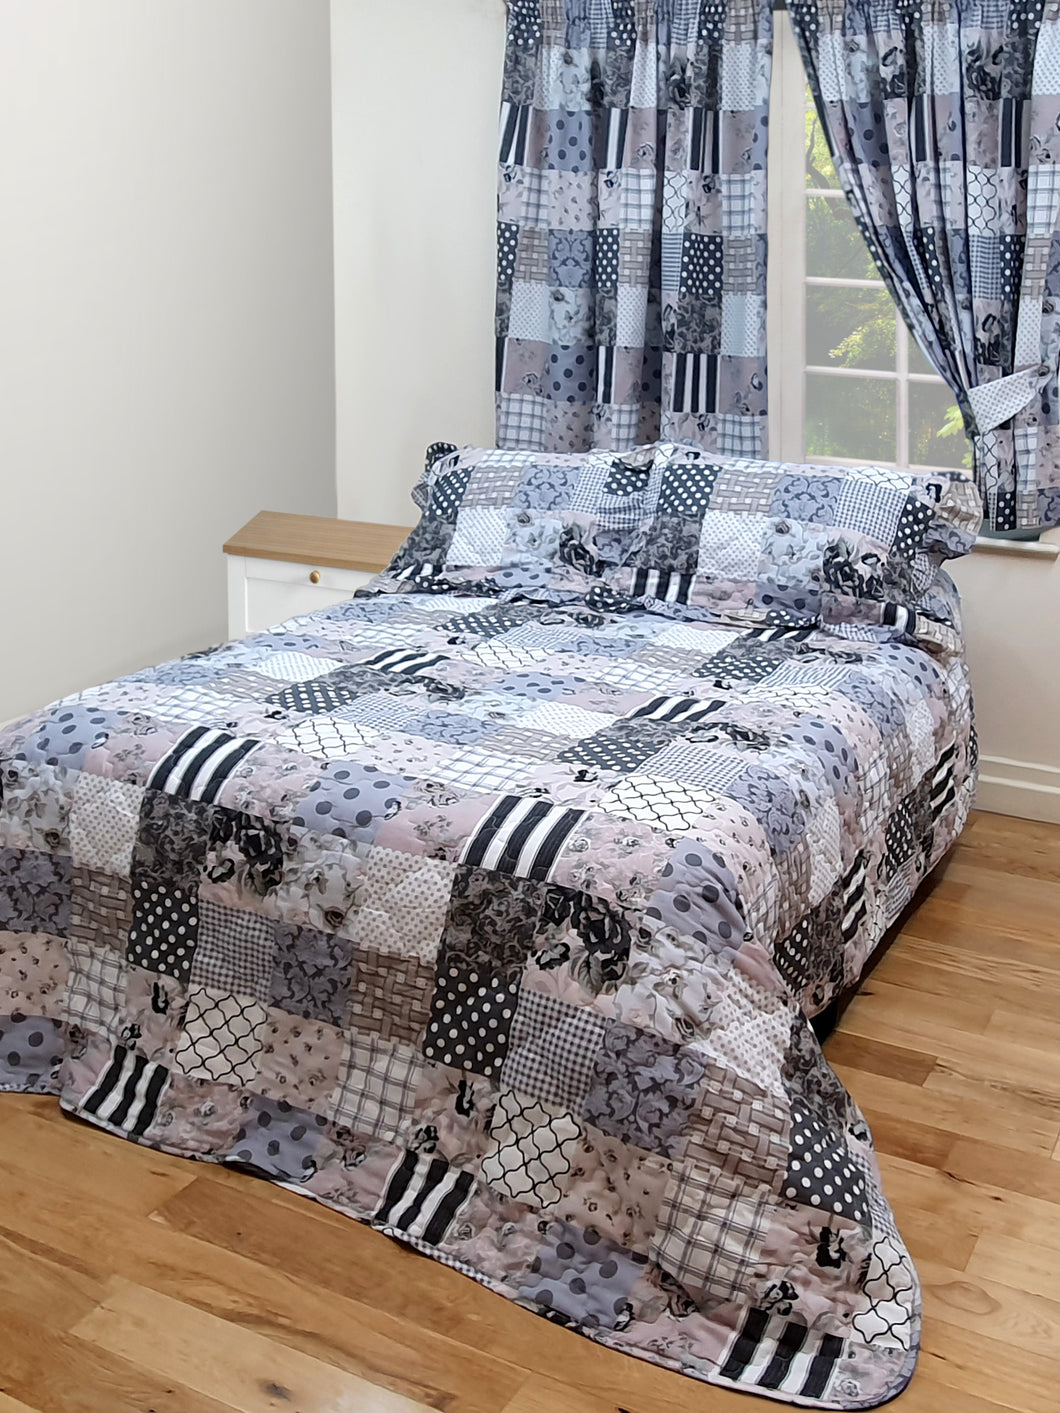 Patchwork Grey - Quilted Bedspread Throw Over Set Charcoal Slate Blue White